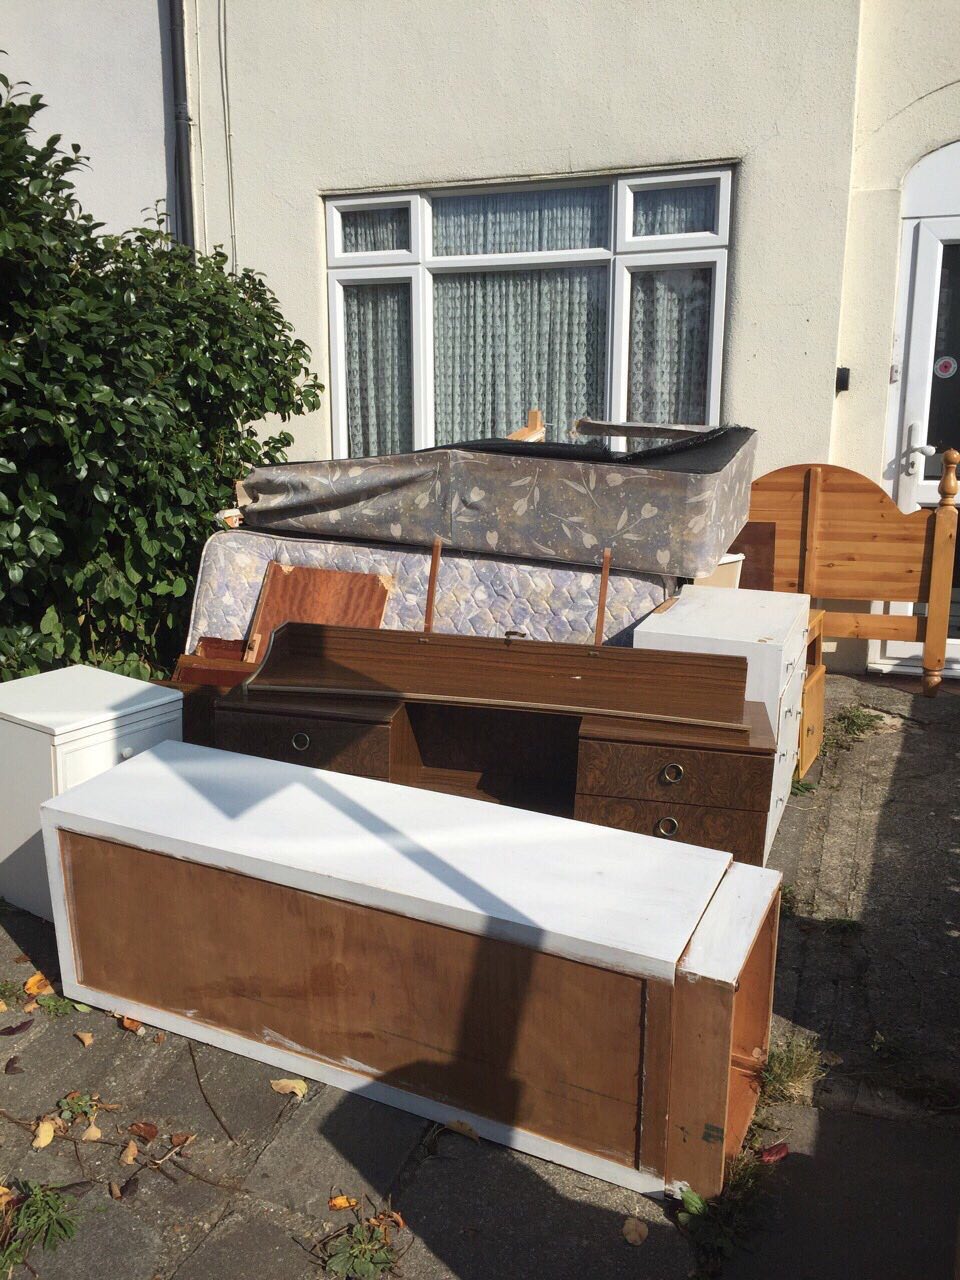 N11 waste removal Bounds Green